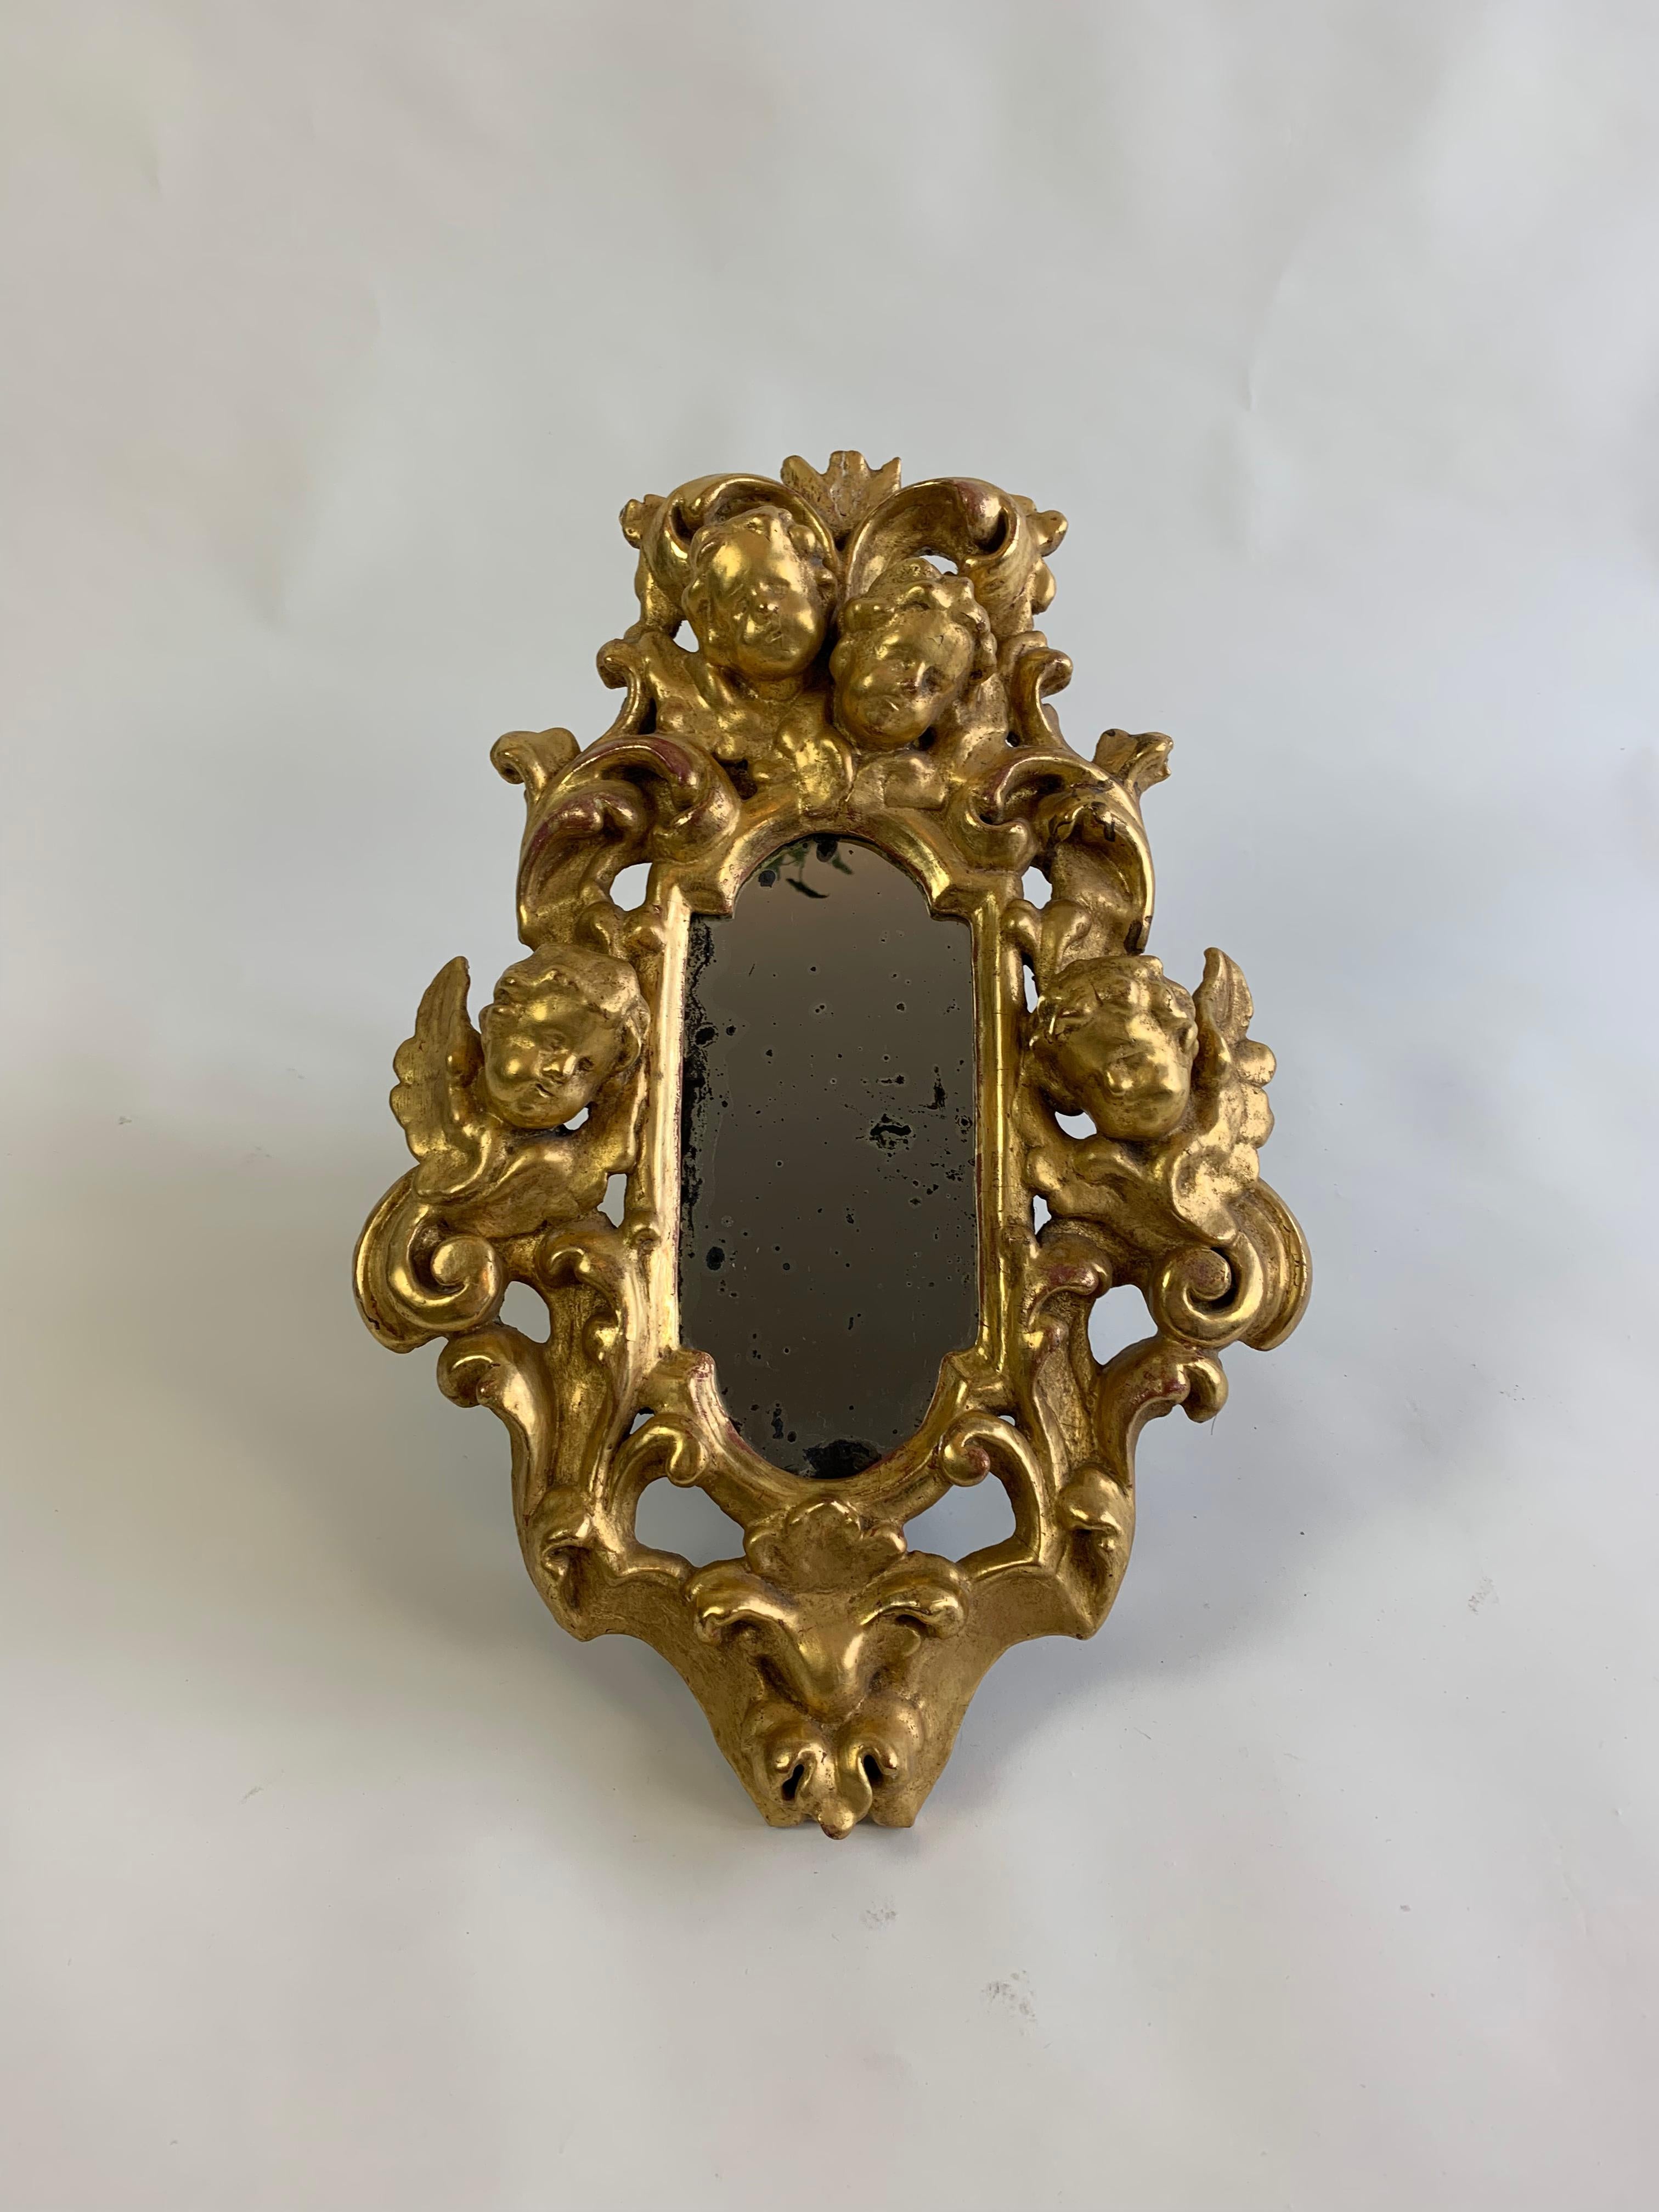 A pair of Cherub gilt wood mirrors. In good condition reflective of age. Mirrors have a lovely aged patina. Sold as a matching pair but would consider selling individually.